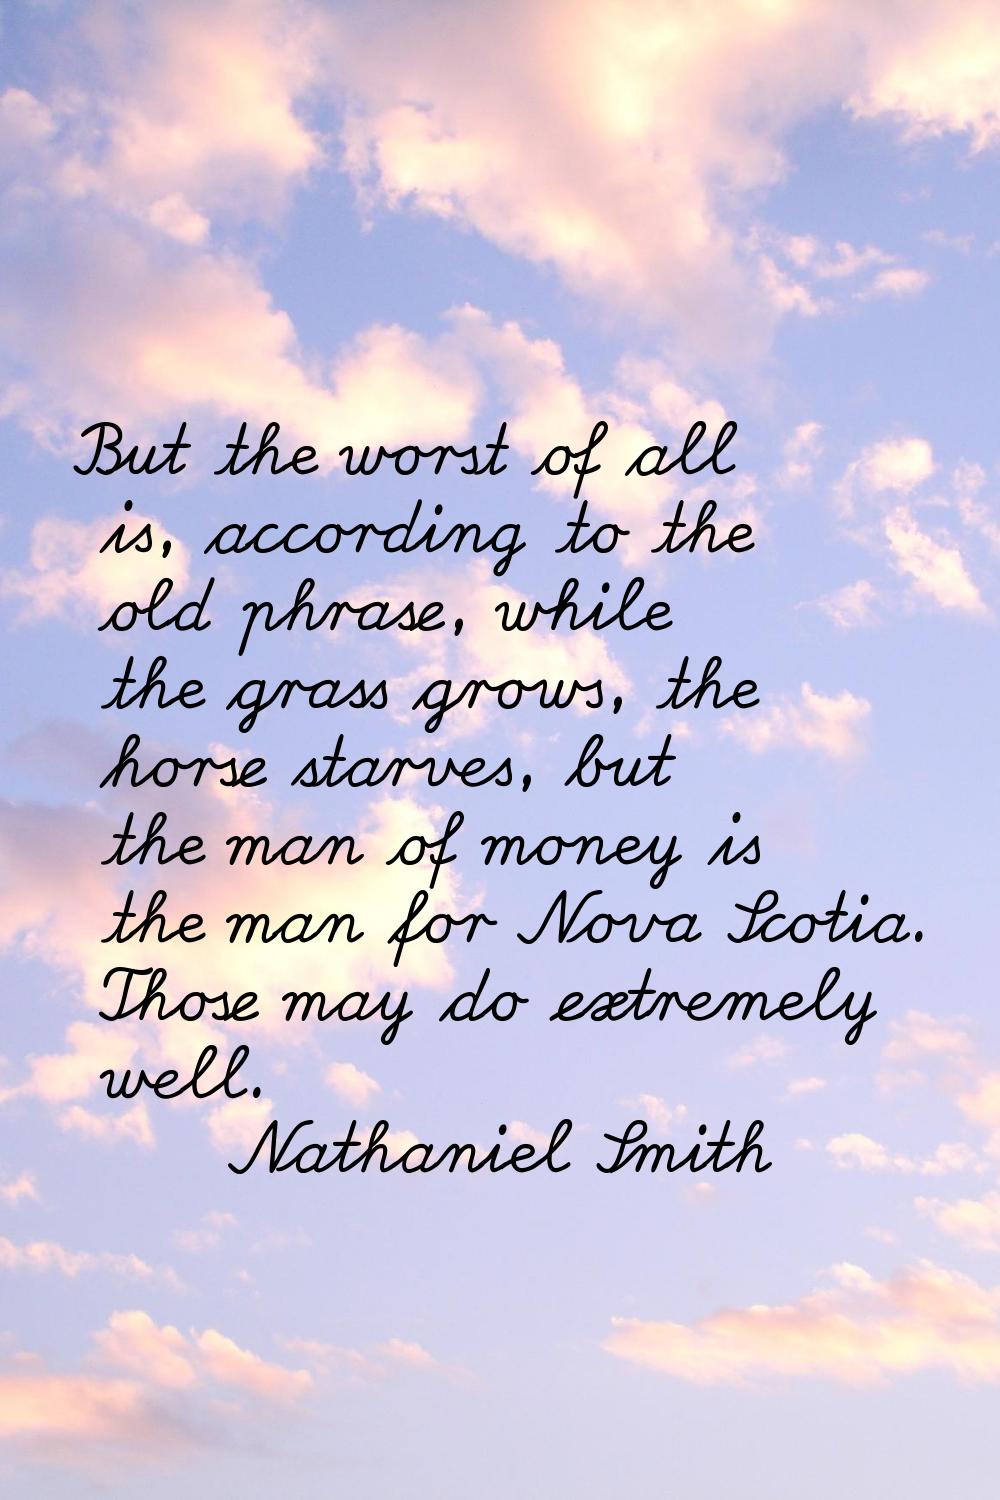 But the worst of all is, according to the old phrase, while the grass grows, the horse starves, but